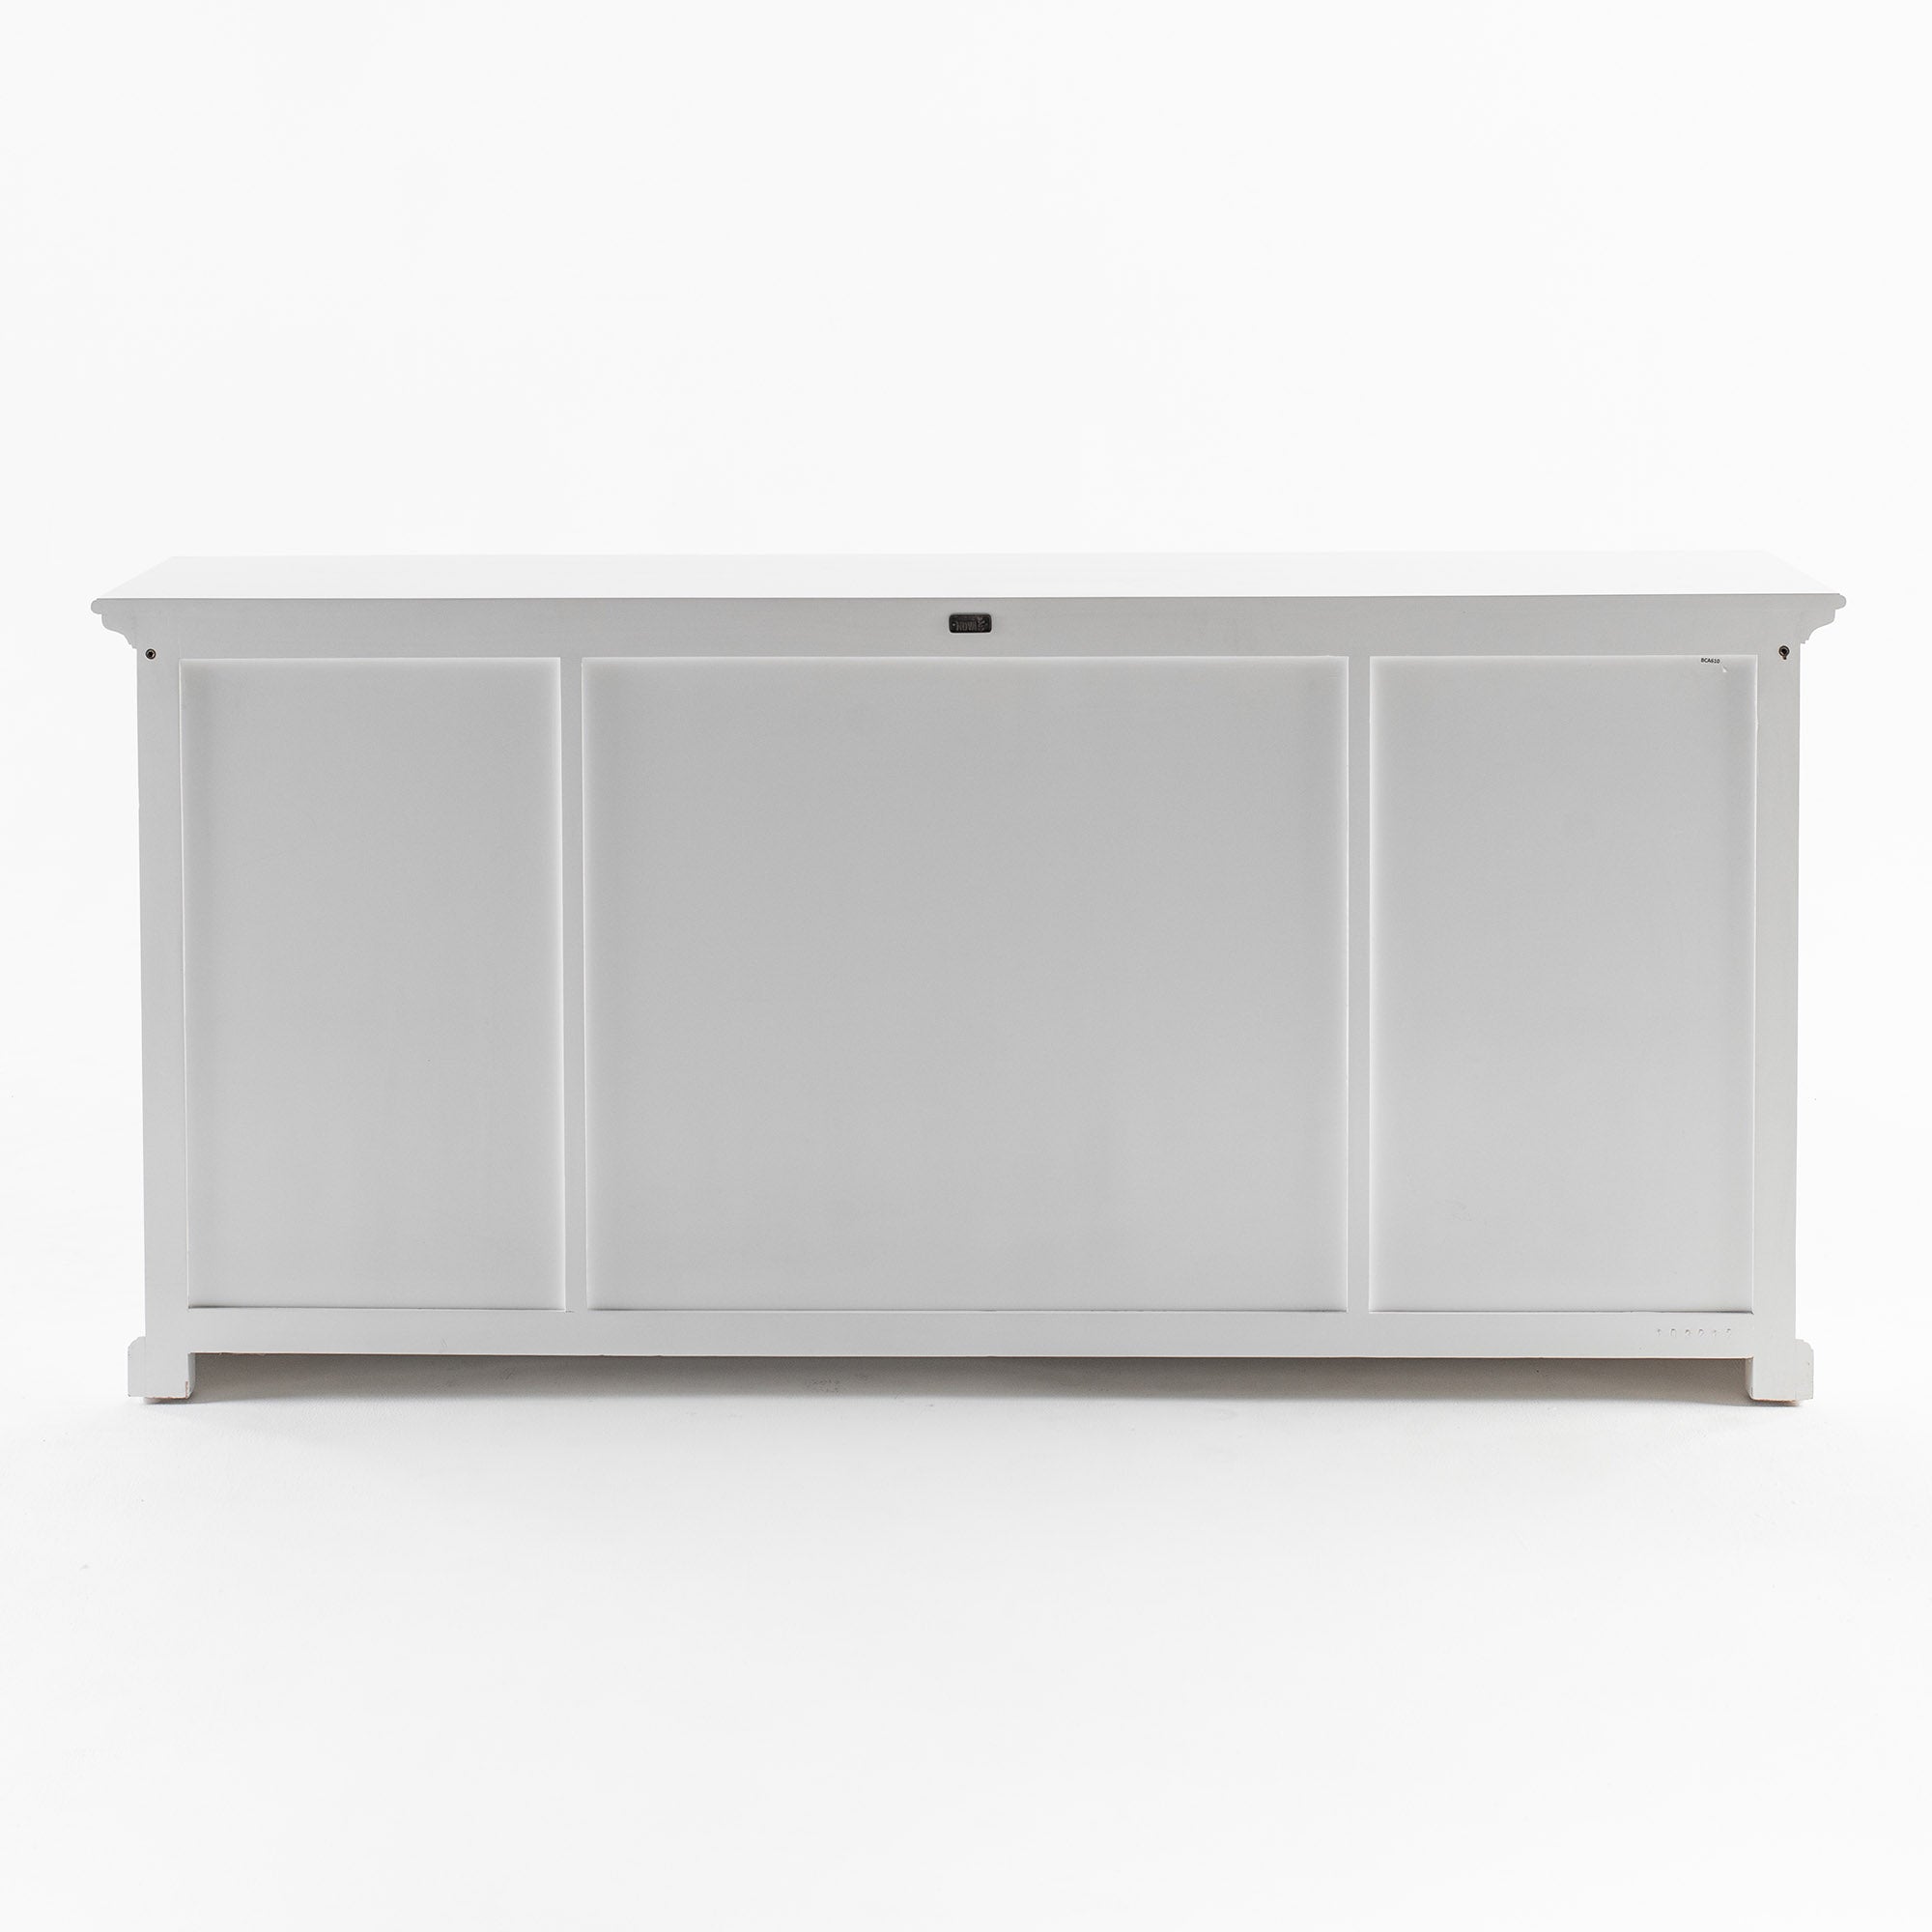 Halifax Coastal White Buffet Hutch Cabinet with 4 Glass Doors